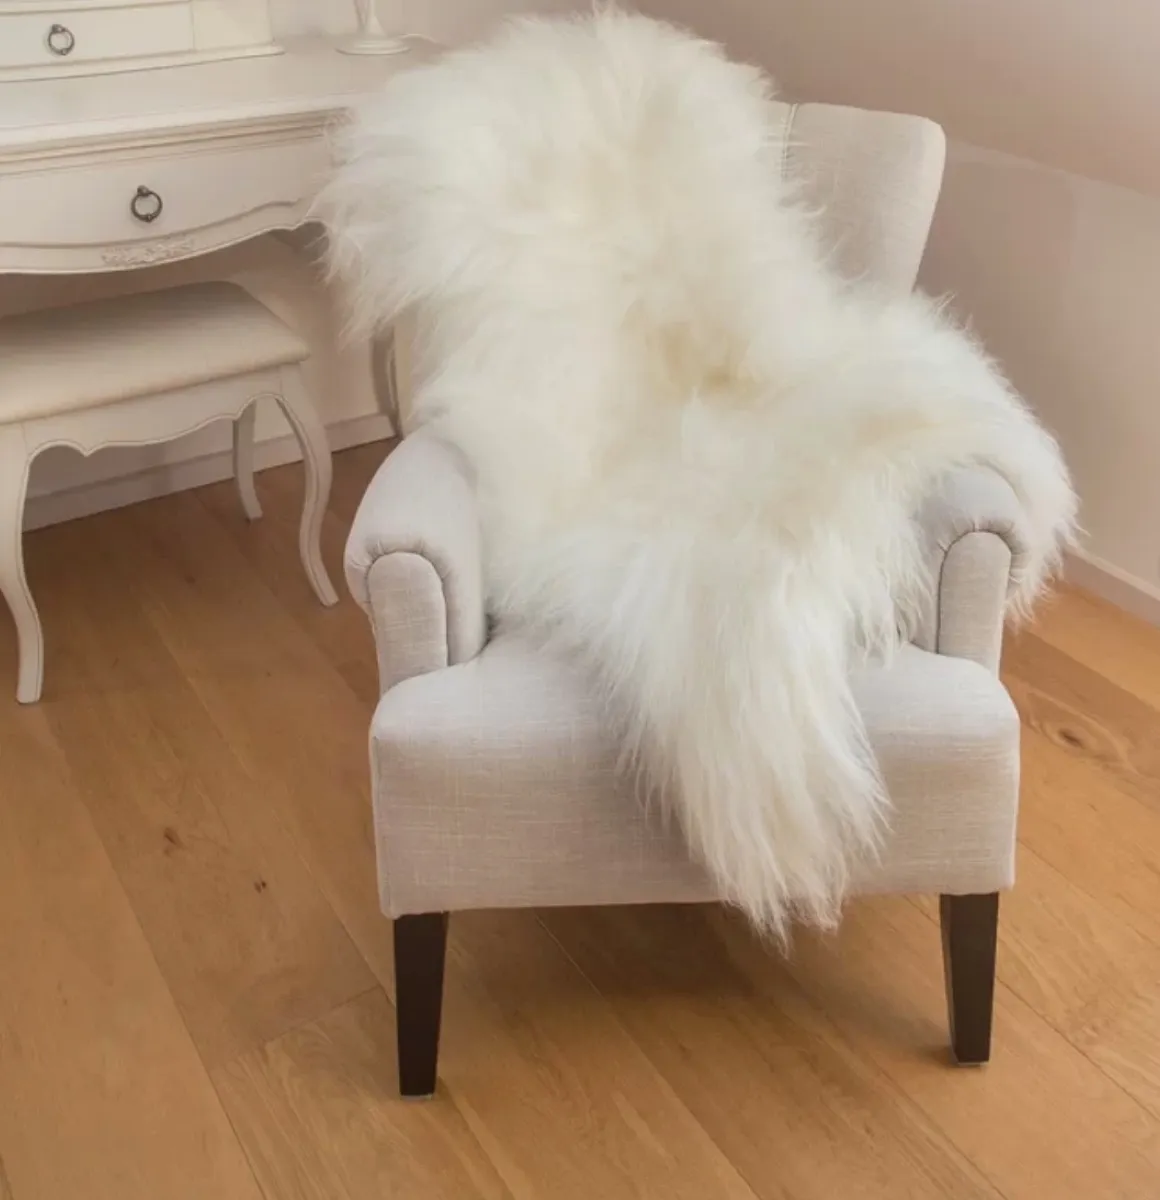 sheepskin rug over chair, old fashioned home items